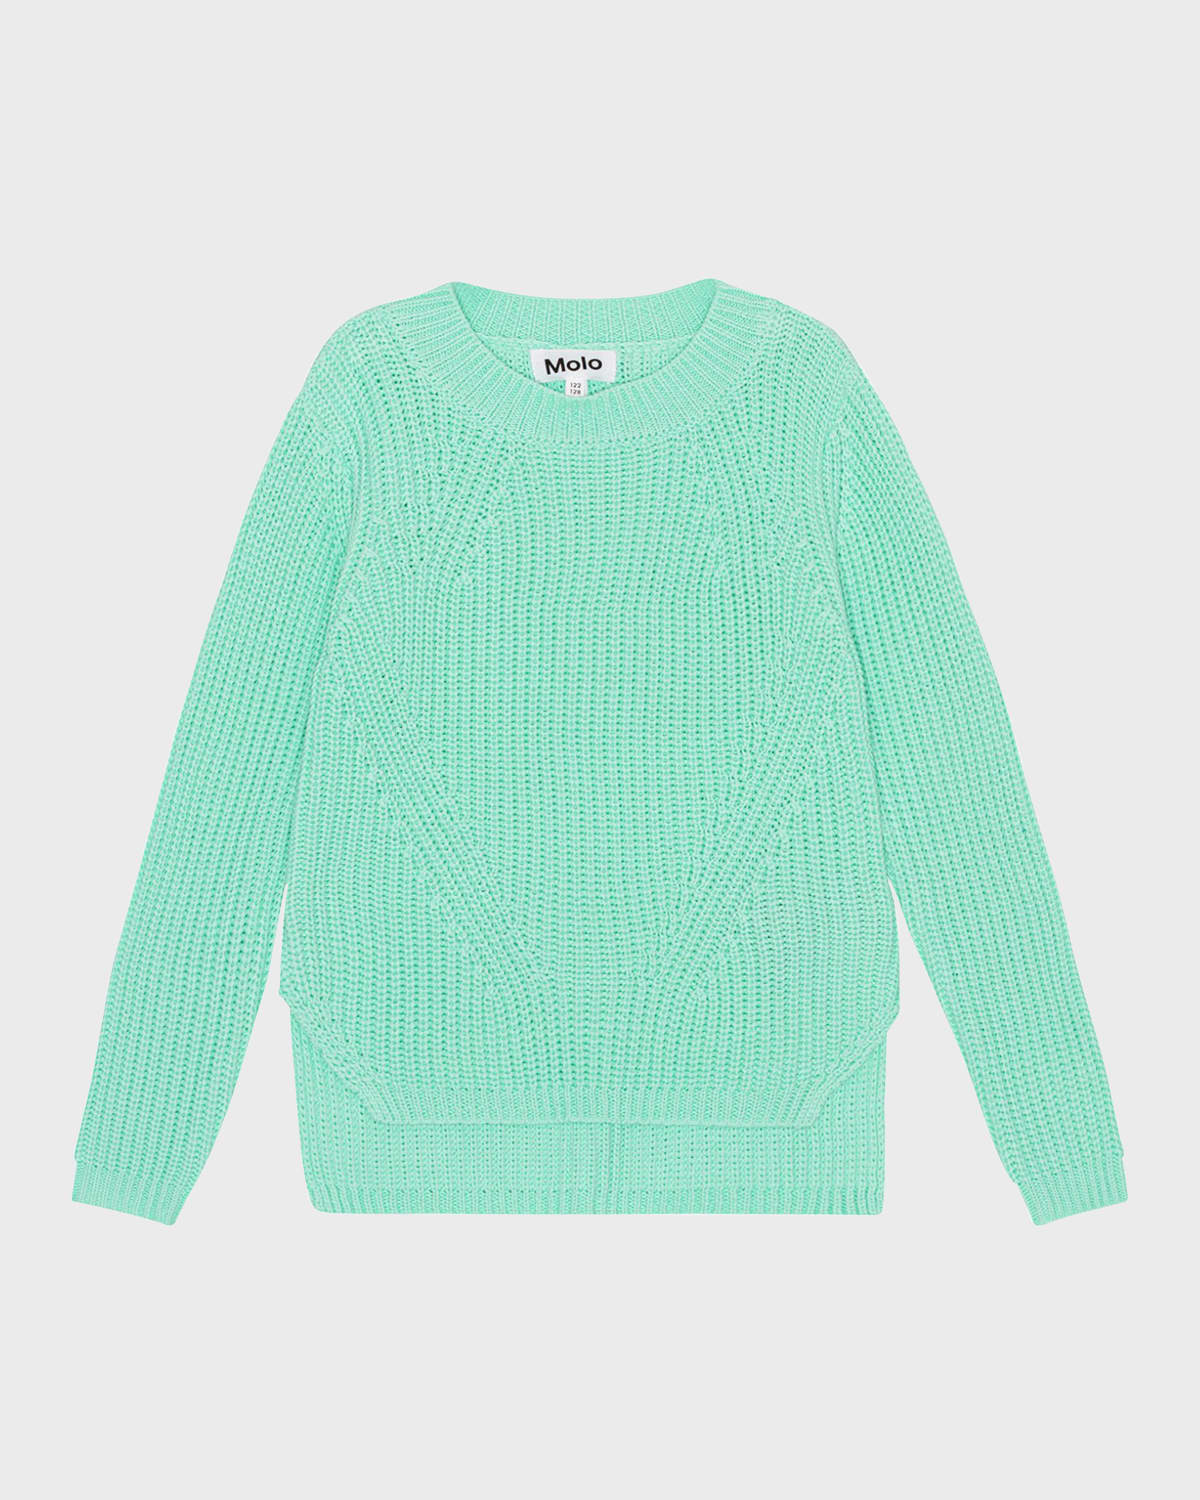 Molo Kids' Girl's Gillis Knitted Jumper In Cool Mint